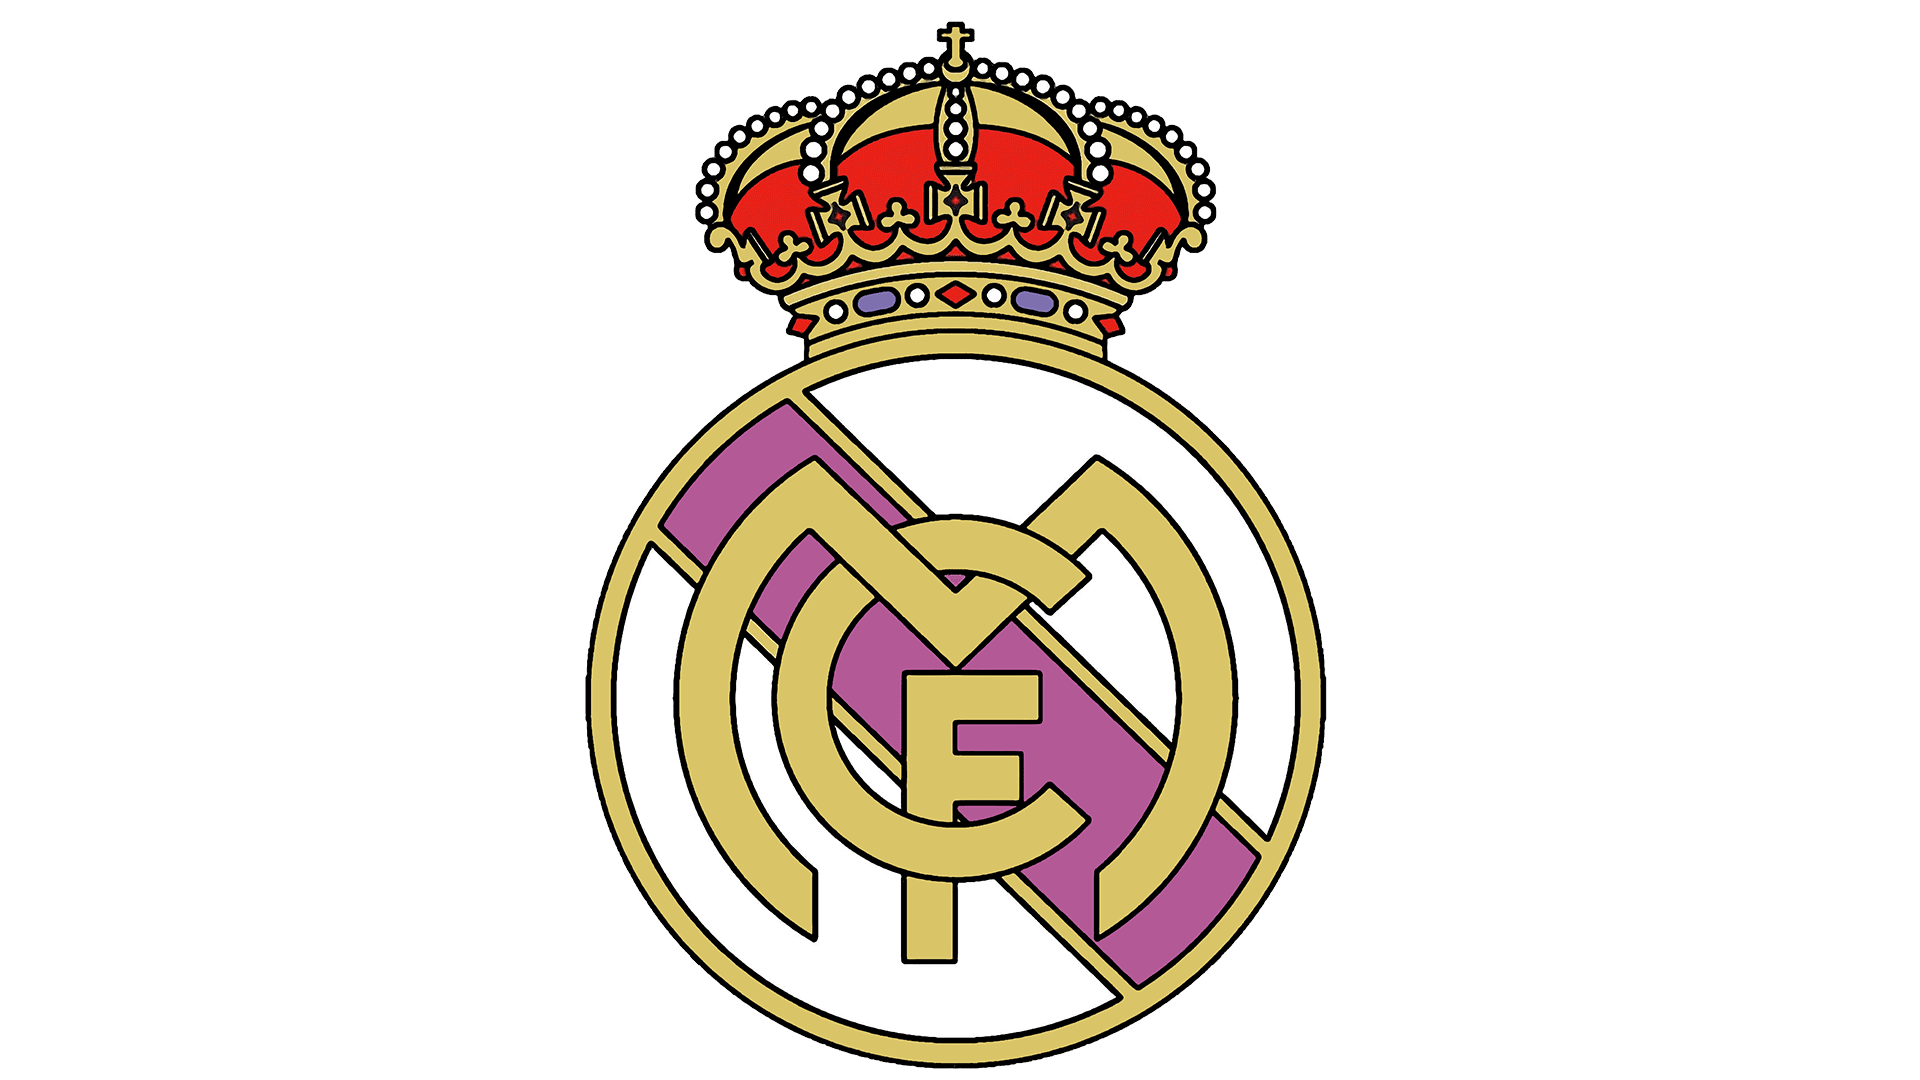 Real Madrid Logo Png 2020 2019 2020 Real Madrid Kits For Dream